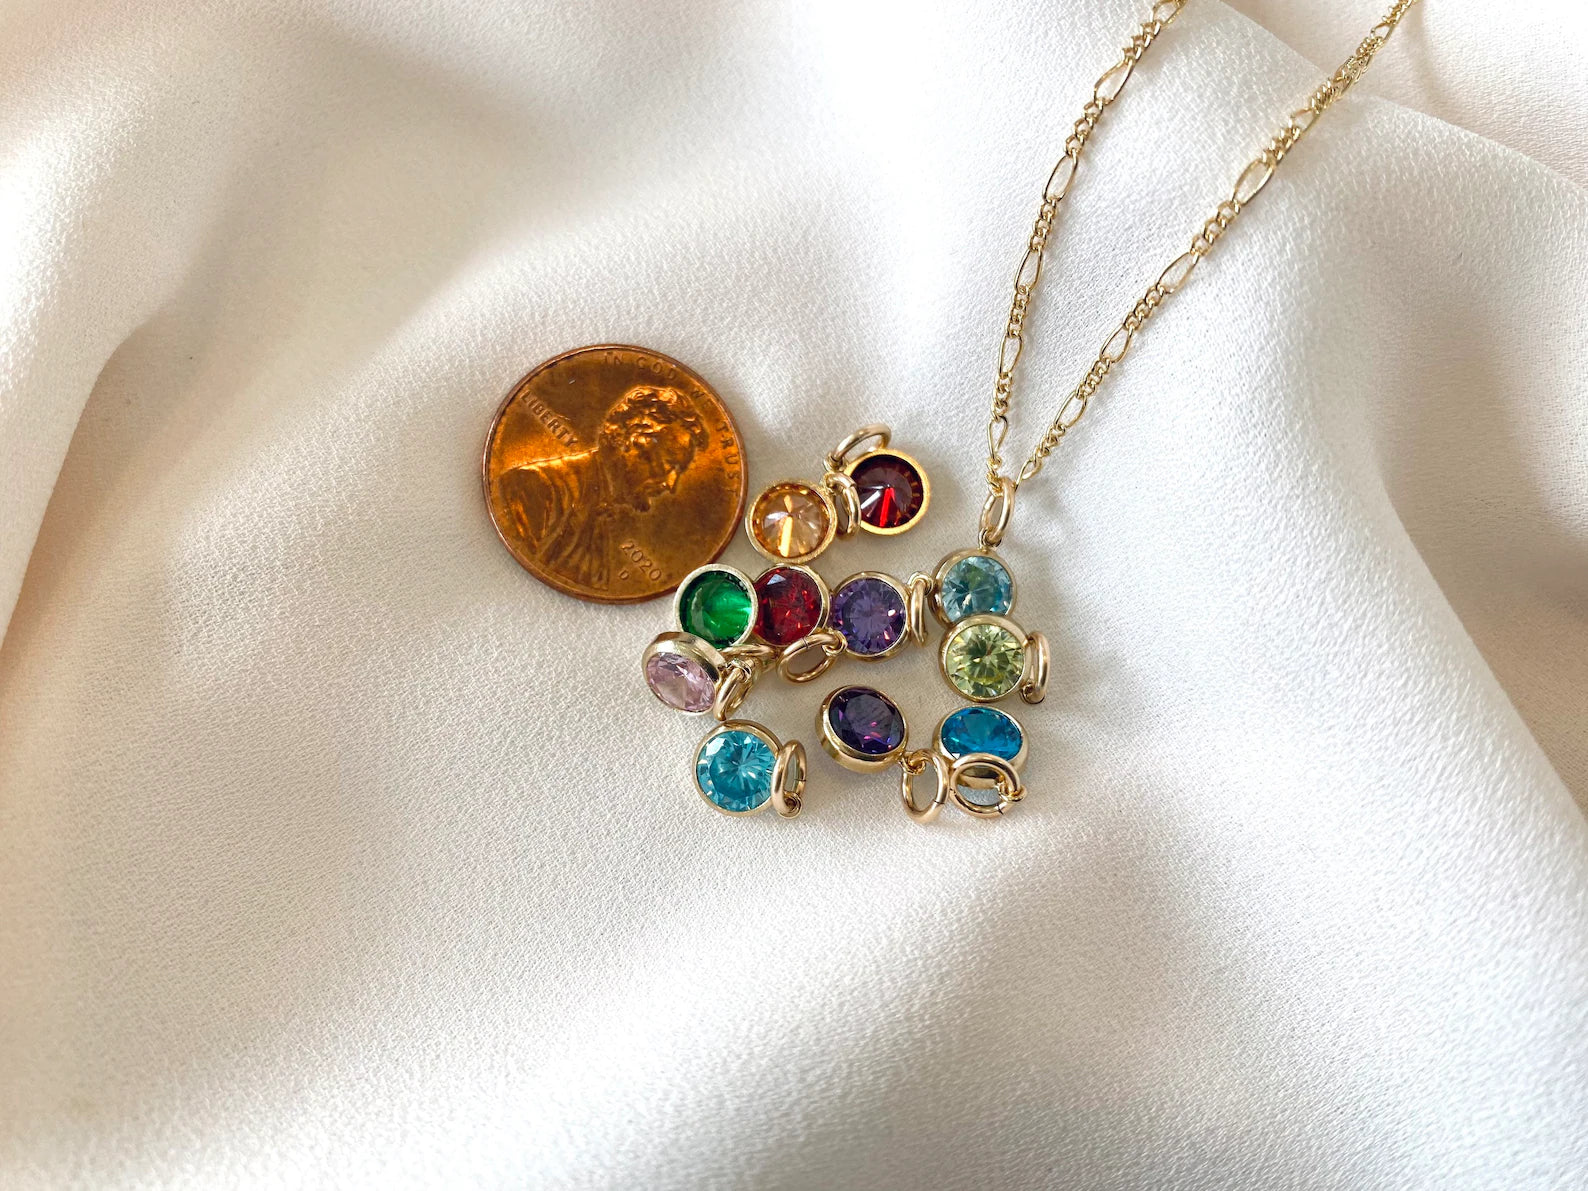 Dainty Birthstone Charm Necklace - Gold Filled - Dainty Coin Pendant - January February March April May June July August September October November December